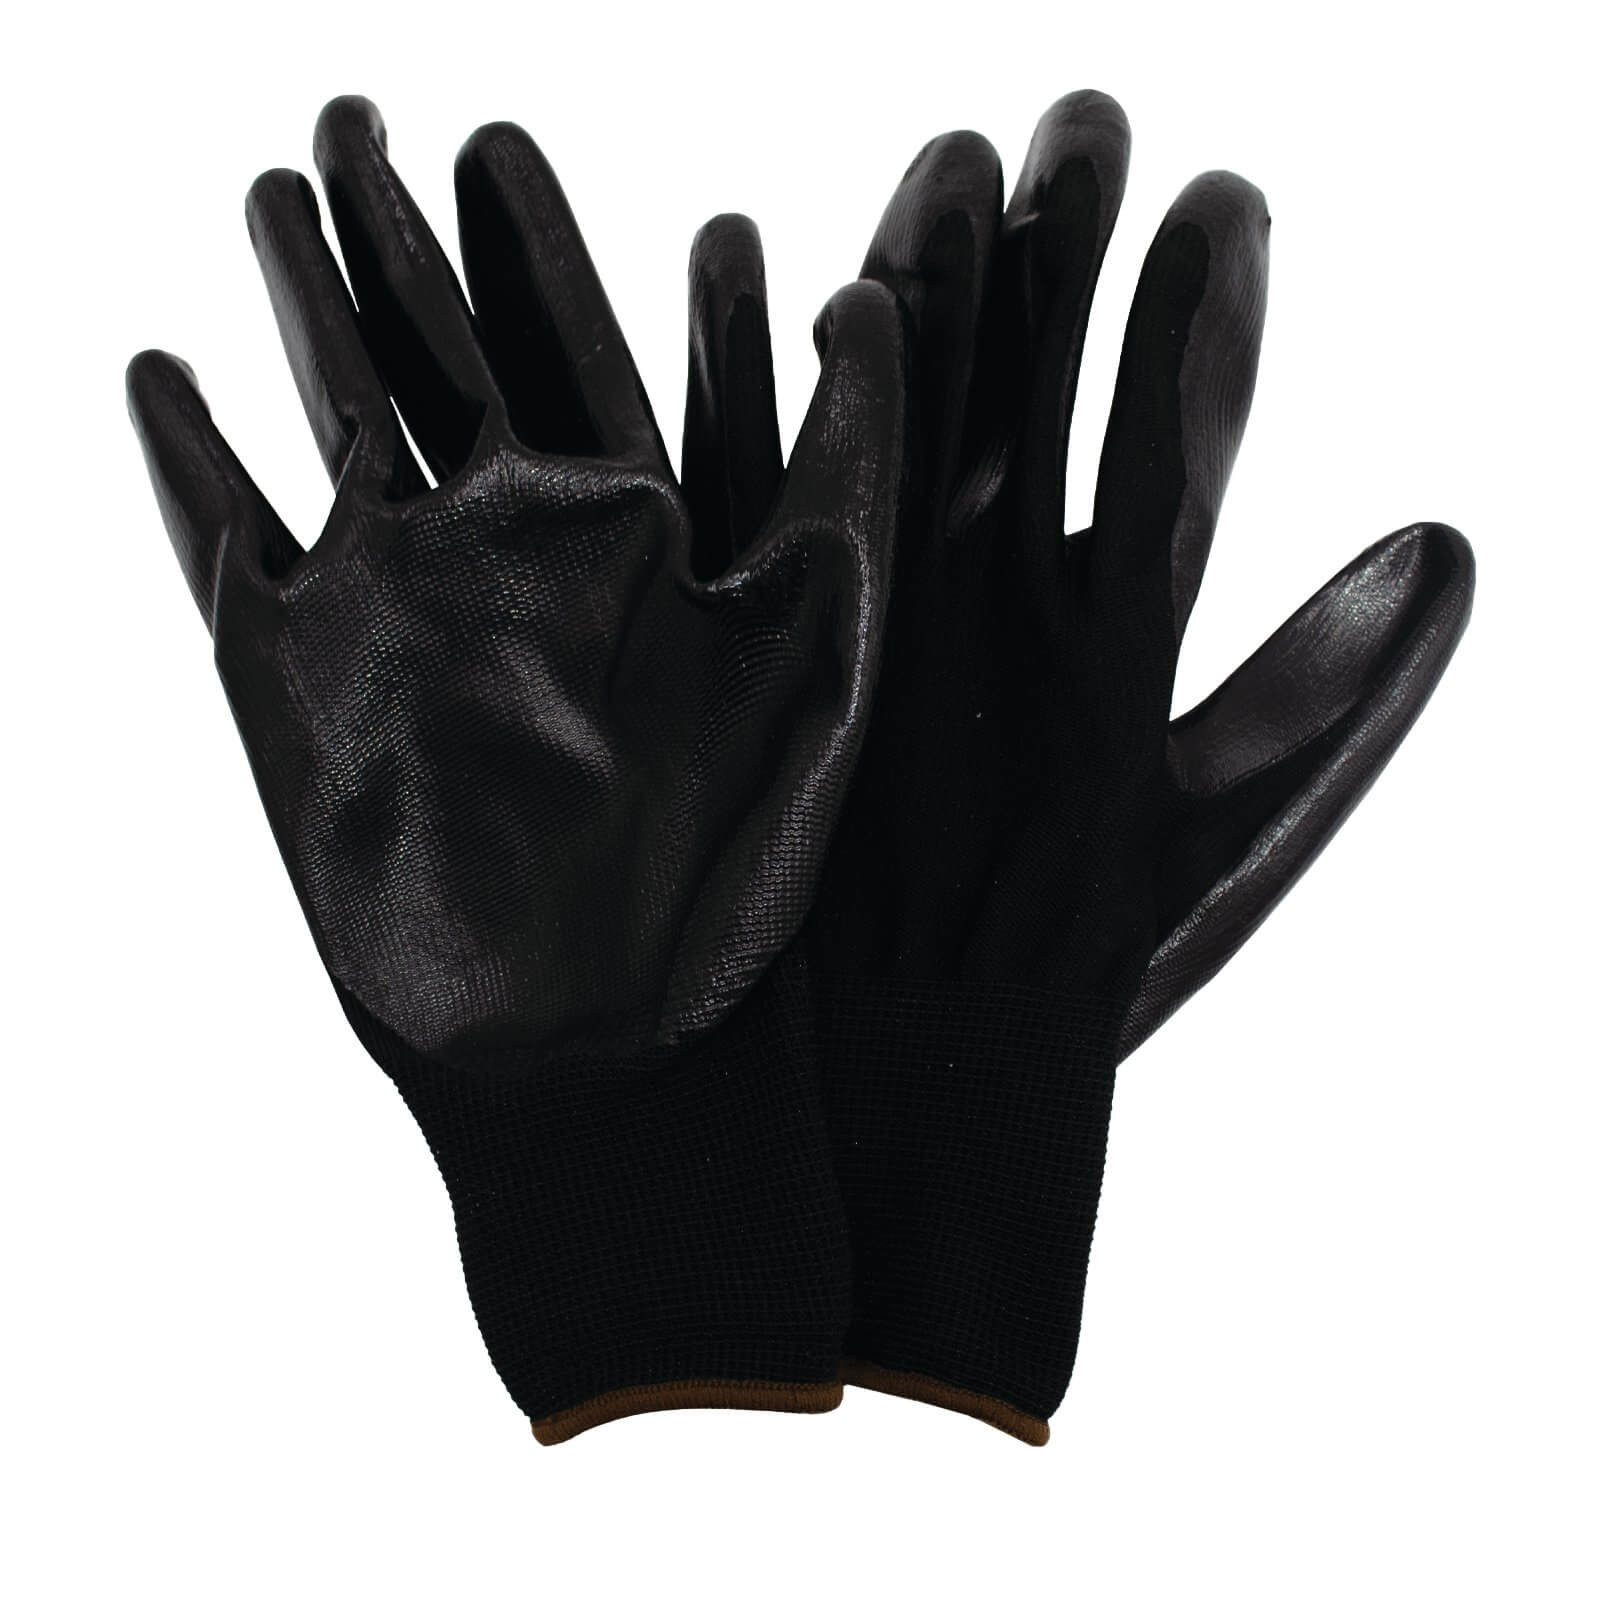 Big Mikes by Stonebreaker Nitrile Dipped Work Gloves - One Size